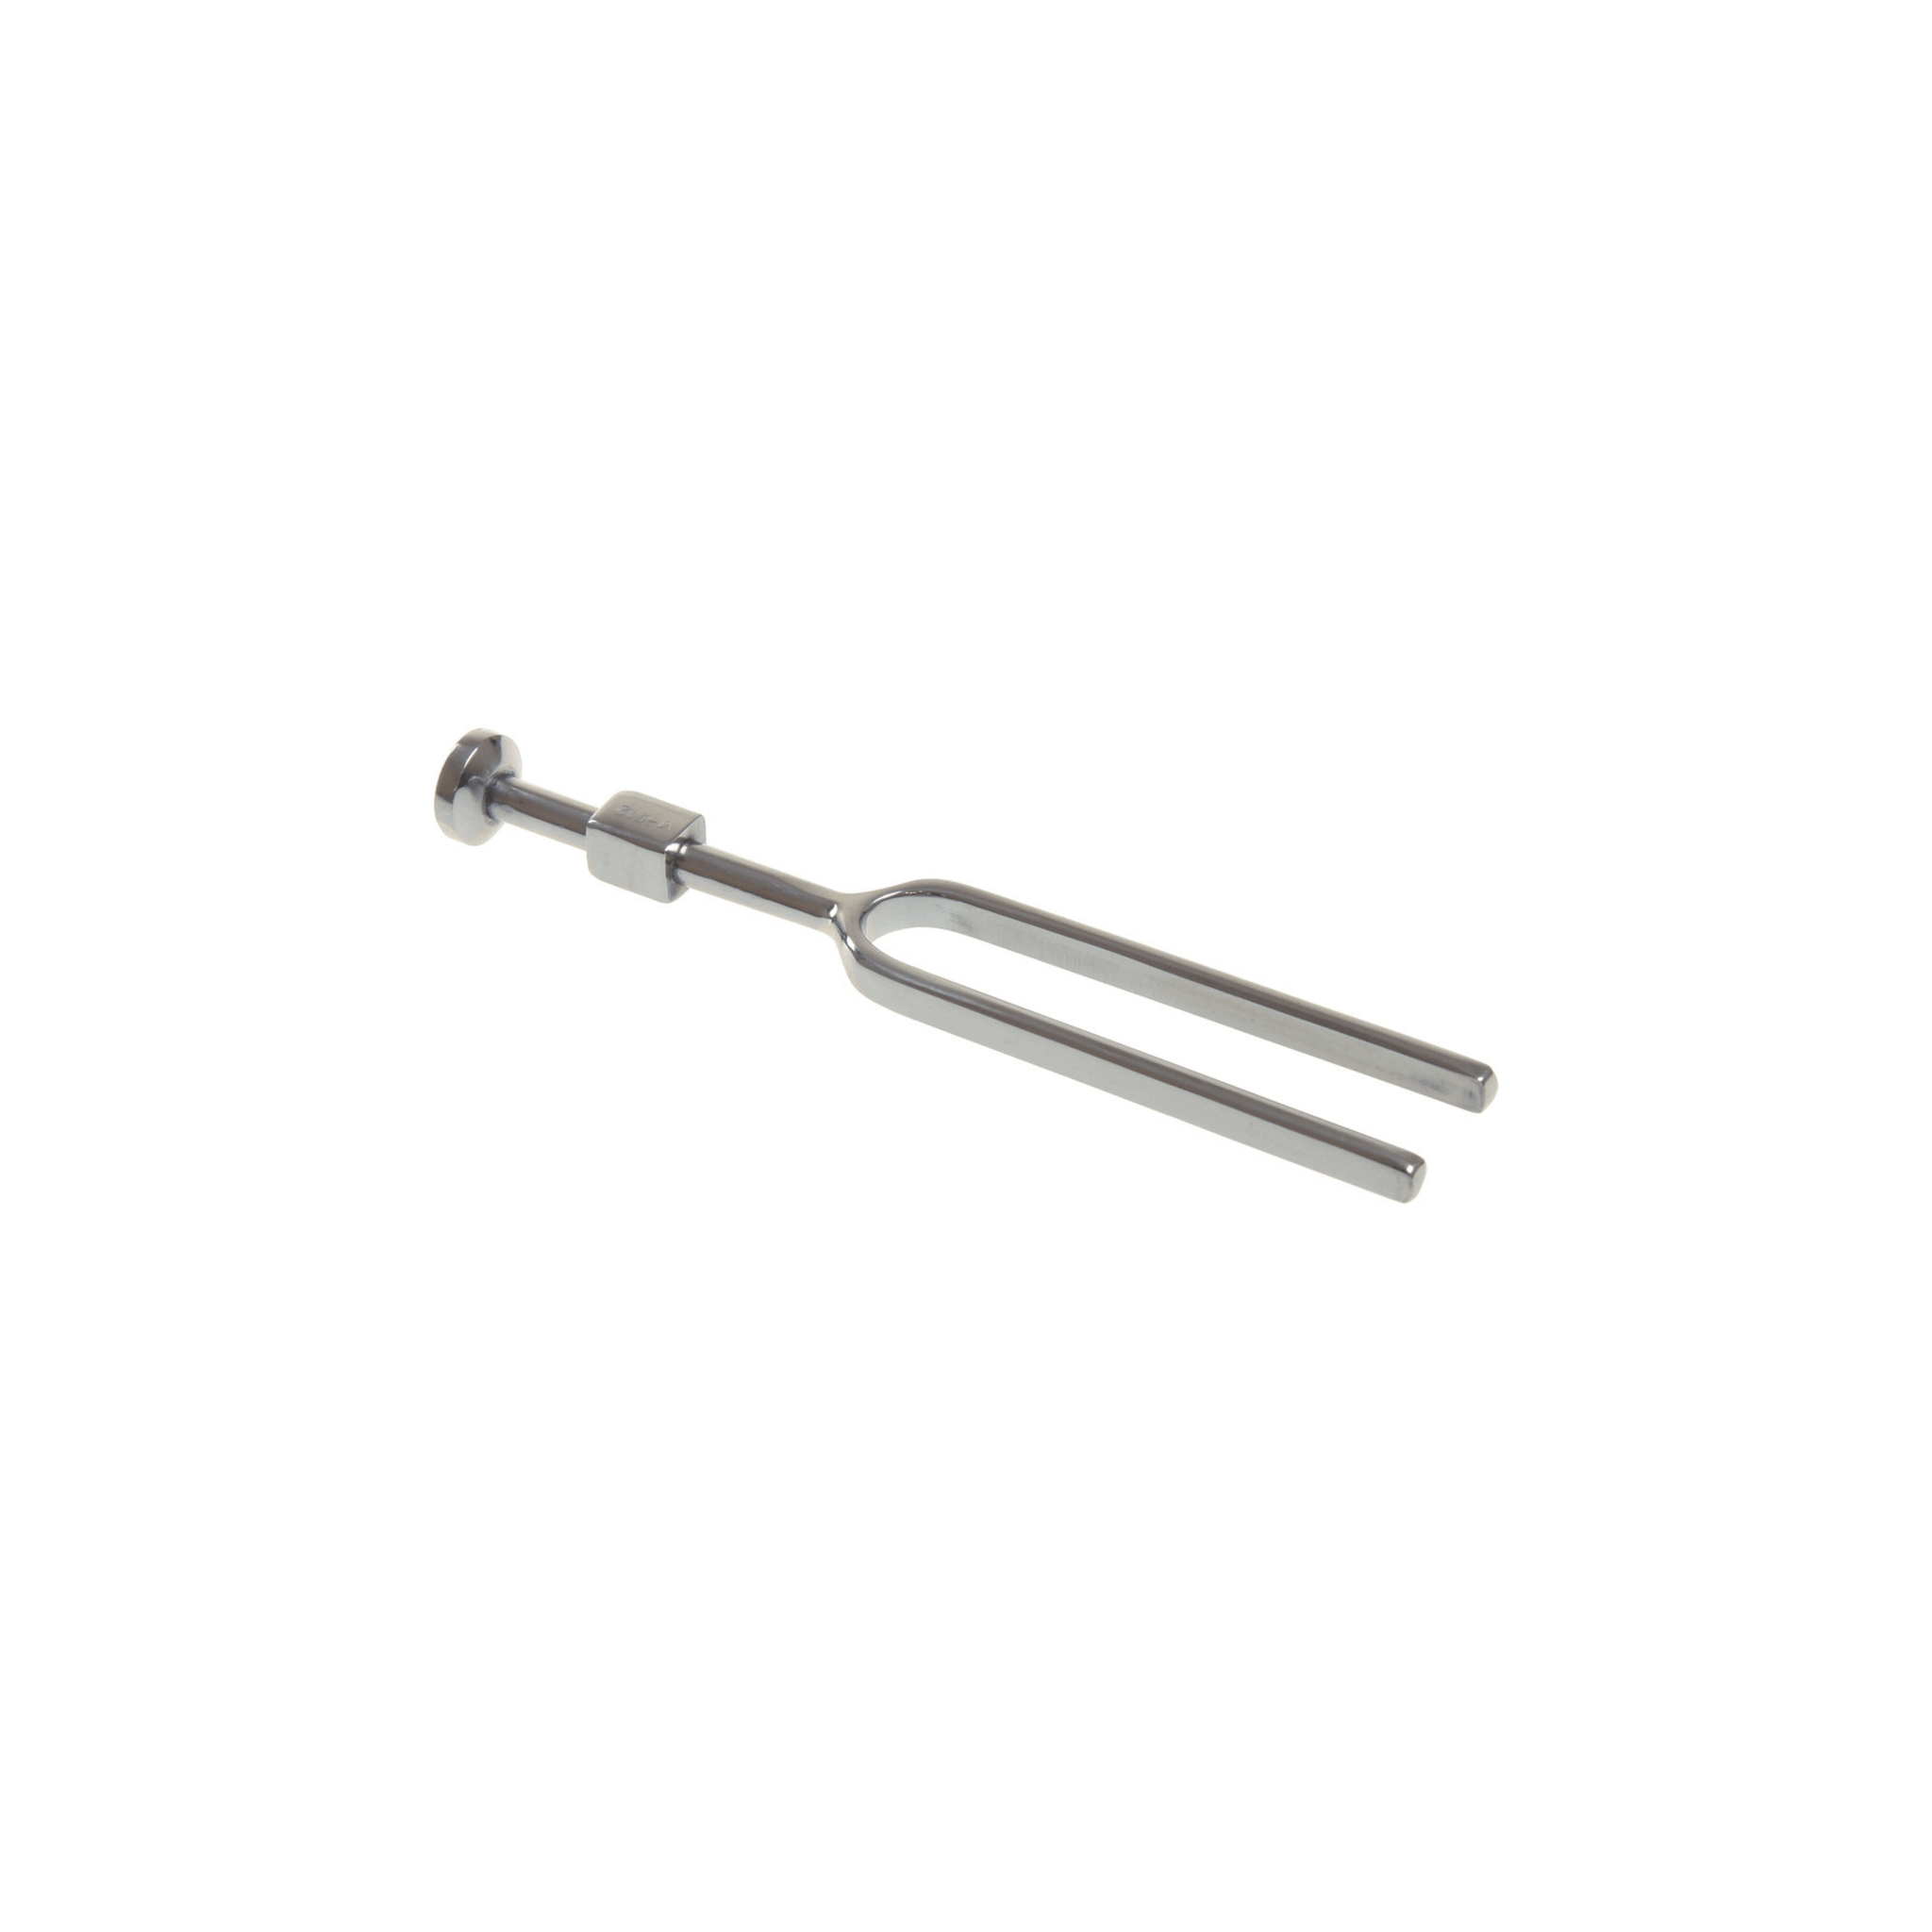 Basic Tuning Fork with Foot- Stainless Steel, C512